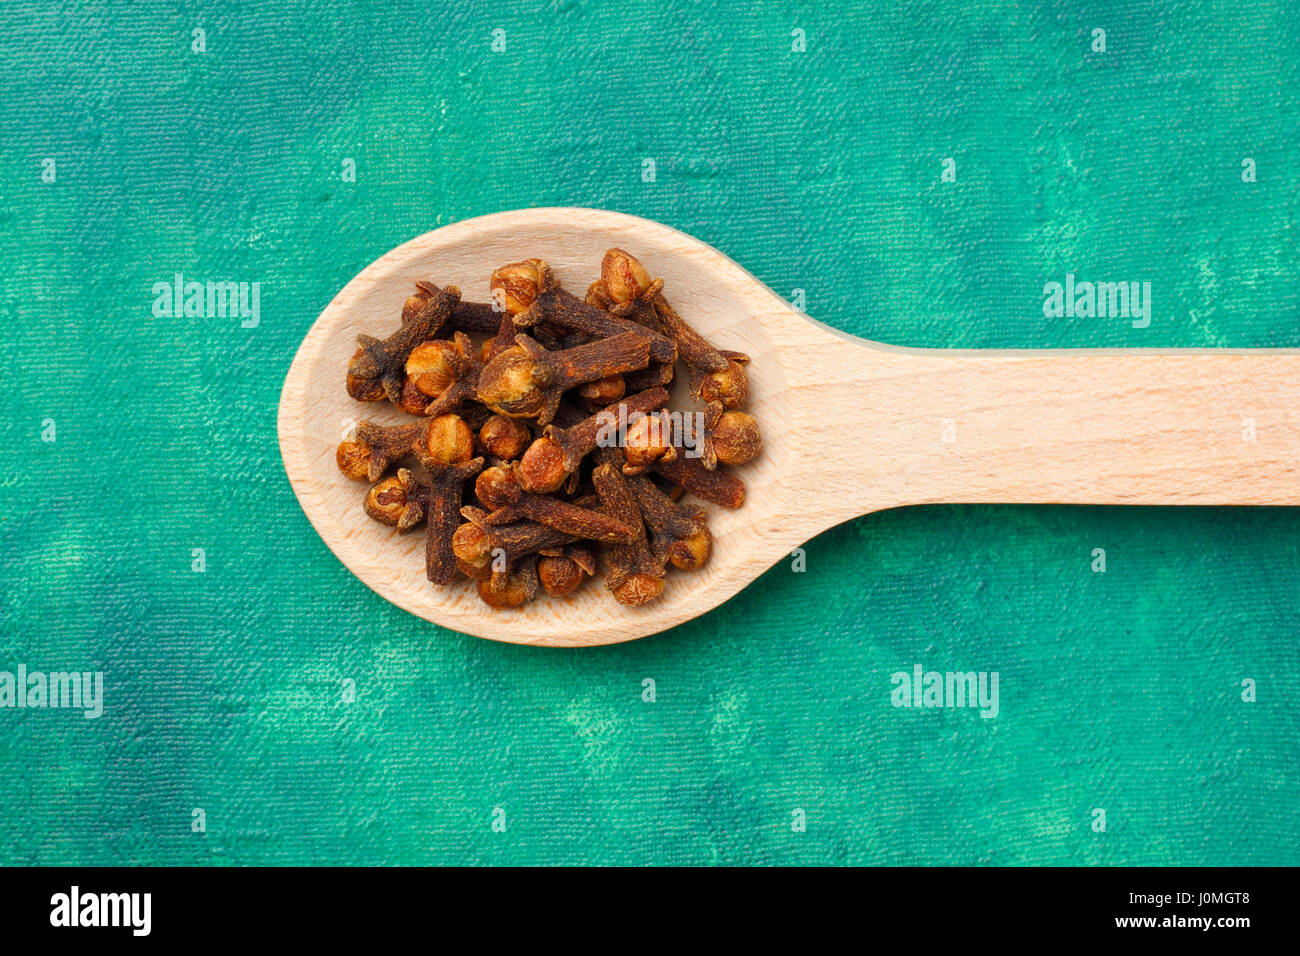 Cloves (Syzygium aromaticum) dried flower buds on wooden spoon over emerald painted textile background Stock Photo